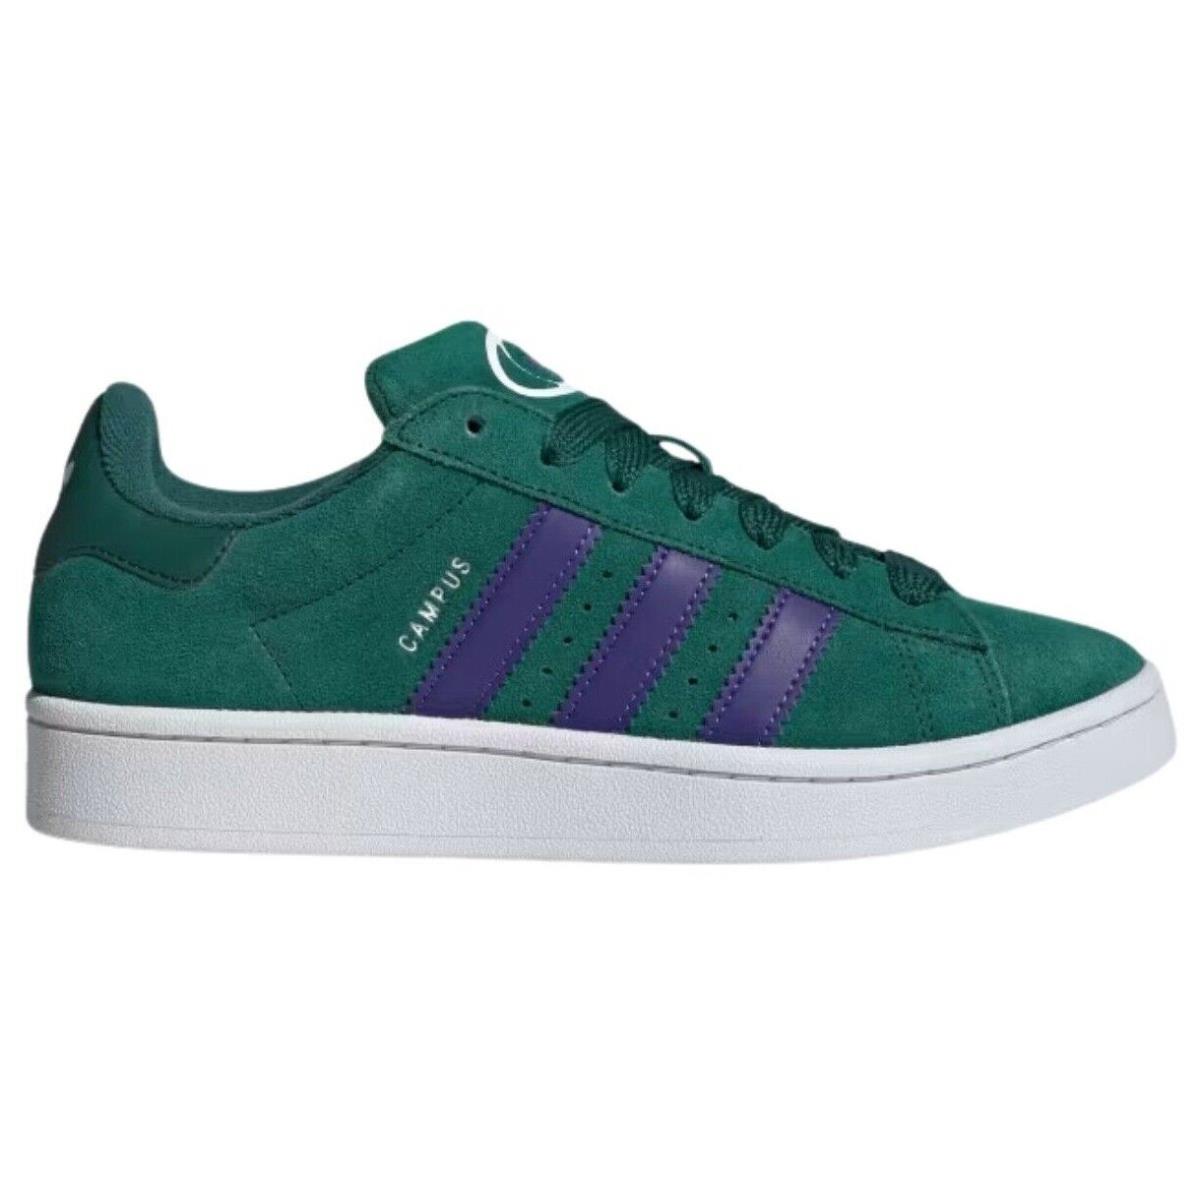 Adidas Originals Campus 00S Women`s Casual Shoes All Colors US Szs 5-11 Collegiate Green / Cloud White / Energy Ink